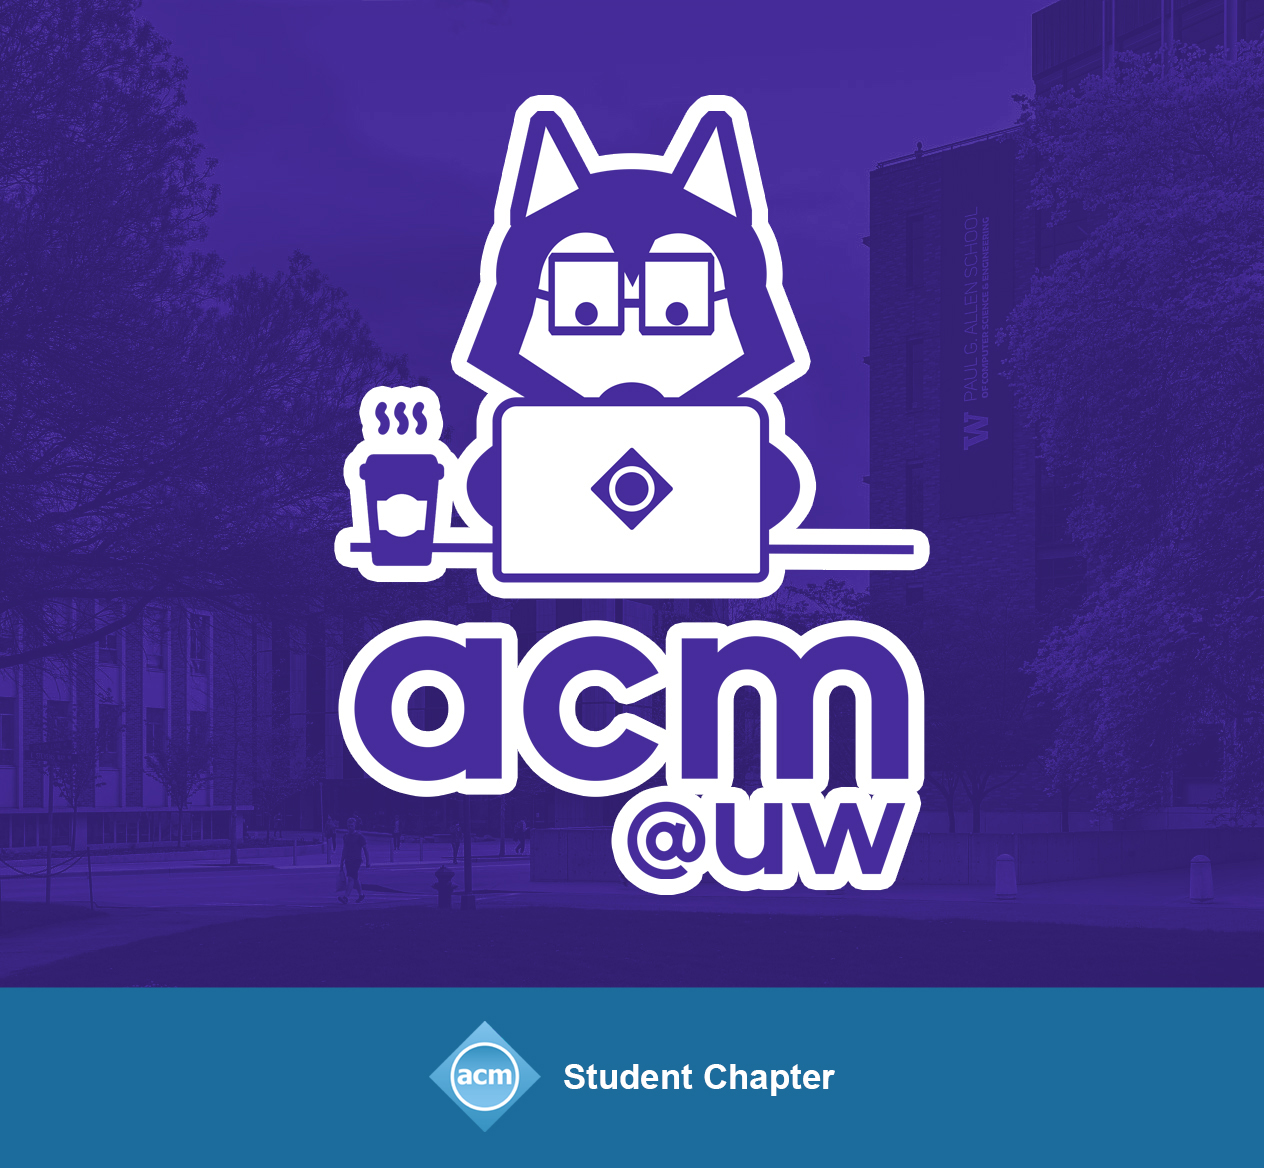 Image of ACM husky and the UW School of Computer Science and Engineering